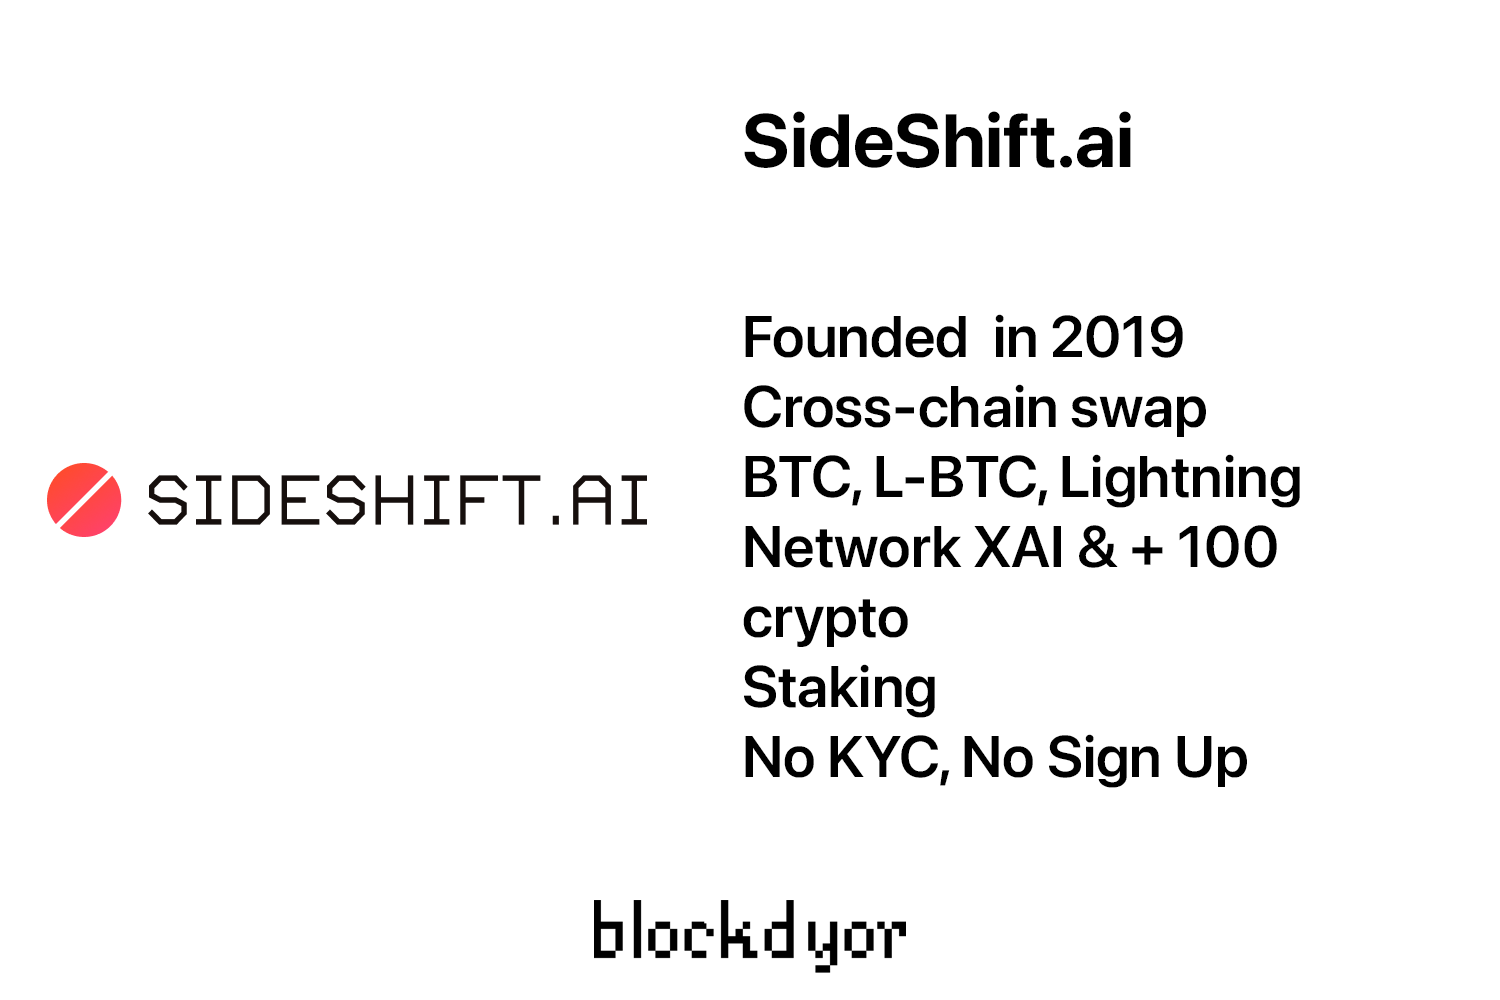 SideShift.ai Overview